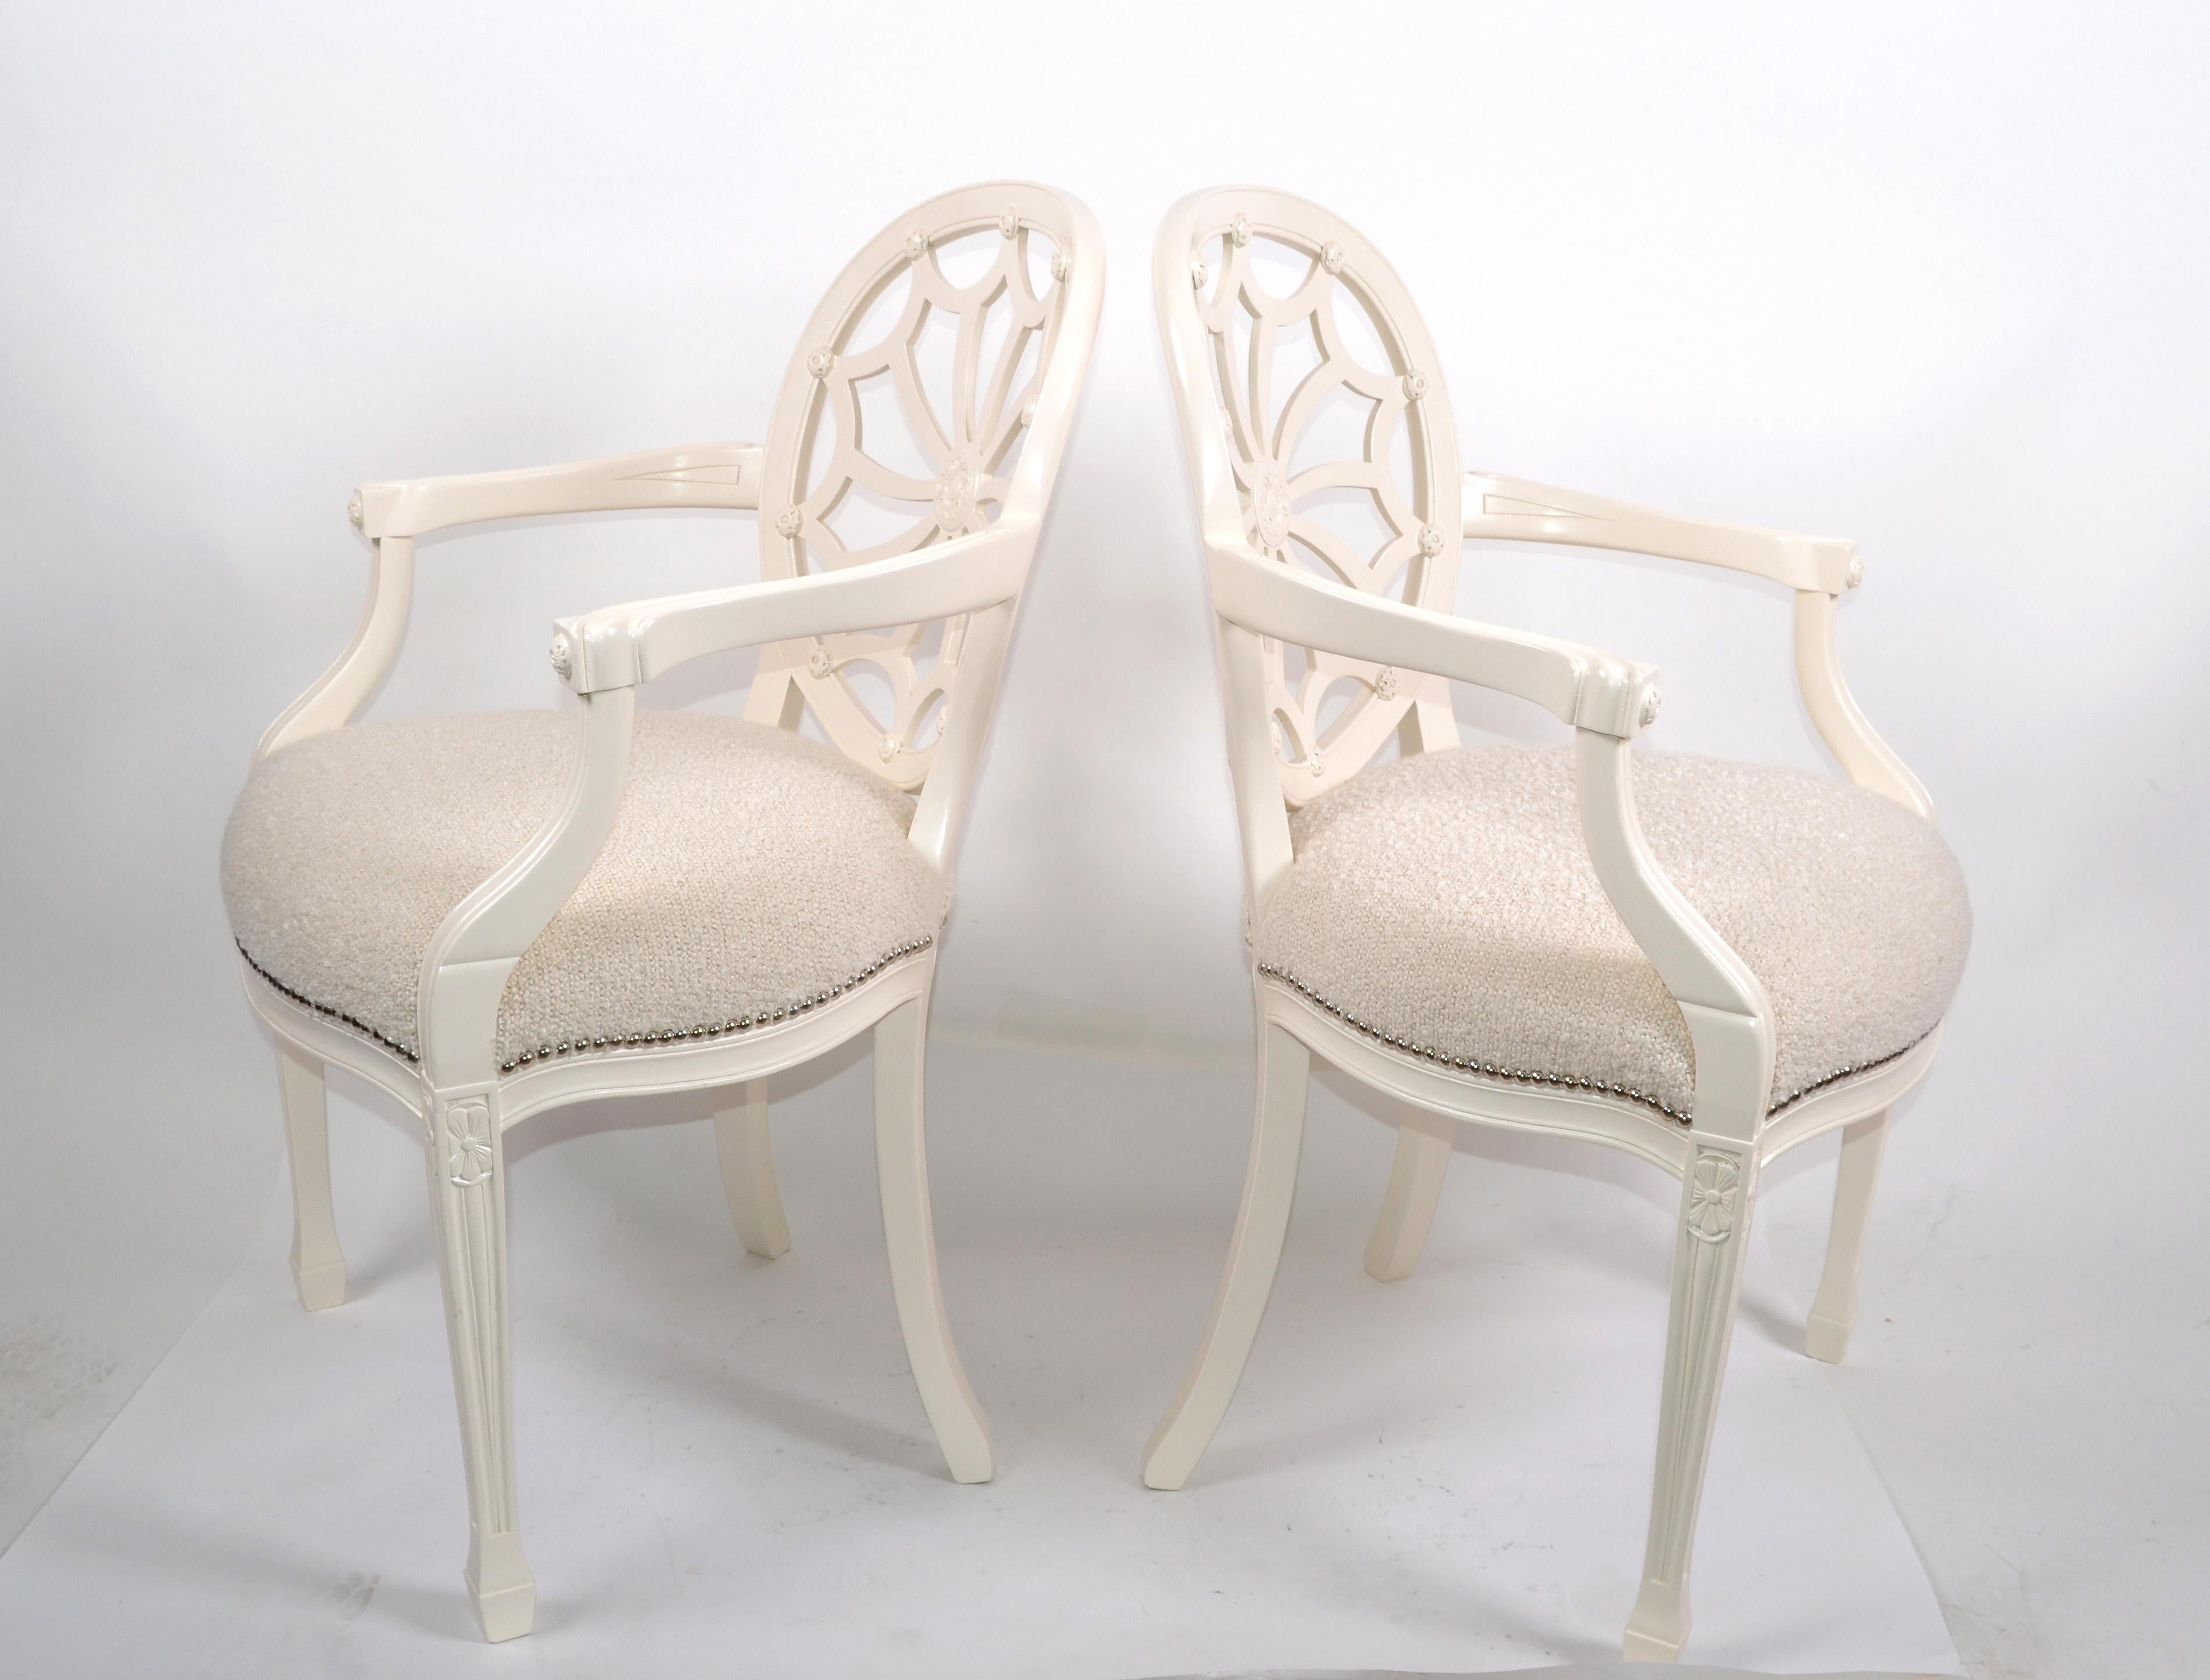 Pair of Hollywood Regency off white wooden ornate armchairs in beige Bouclé fabric seat.
Very detailed carved Medallion back and studded seat.
The set is restored and ready for a new Home.
Measure: Arm height 27.5 inches.